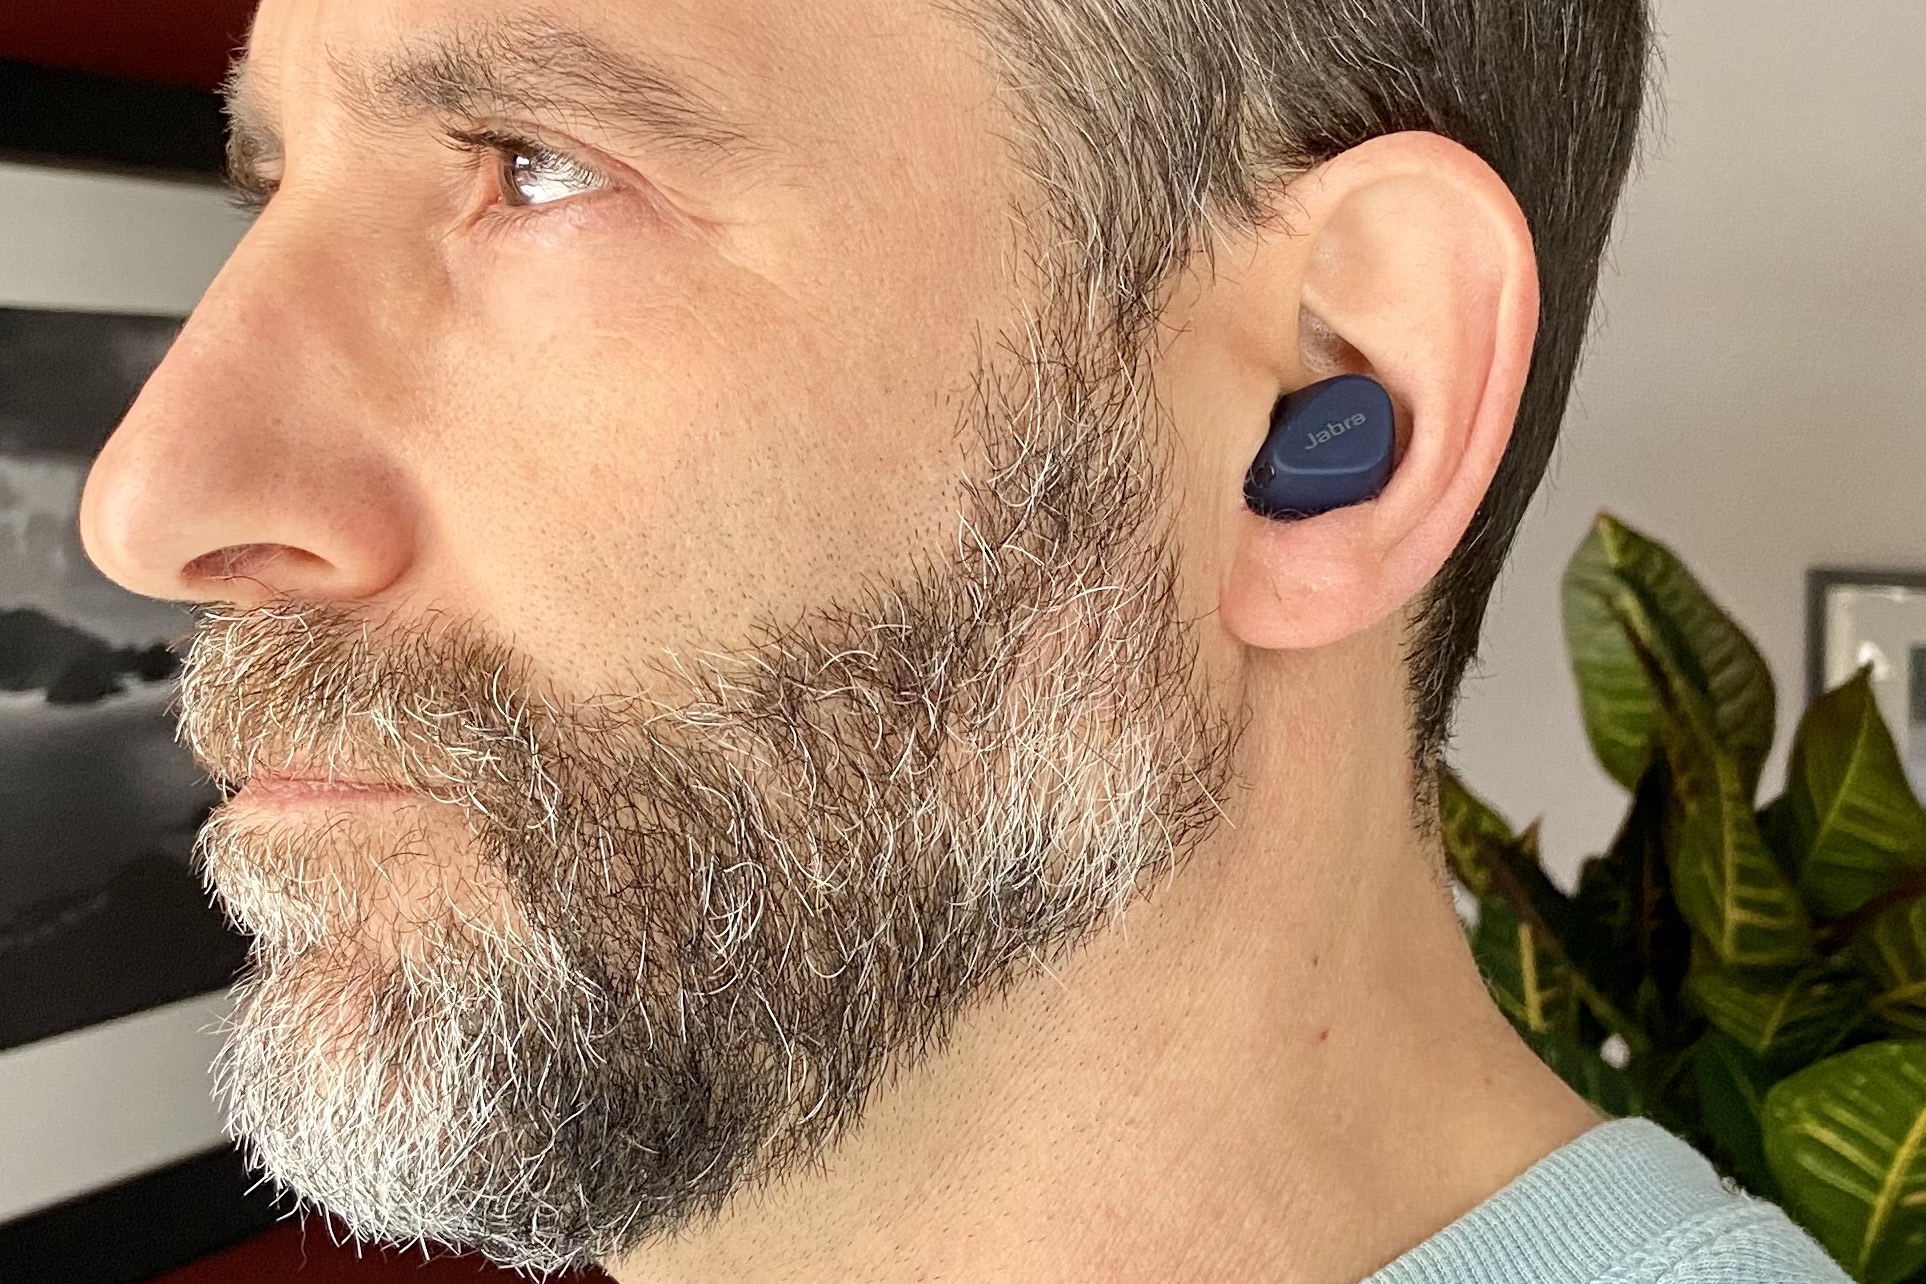 Jabra Elite 4 Active: We got our hands on the new earbuds at CES 2022 - CNET